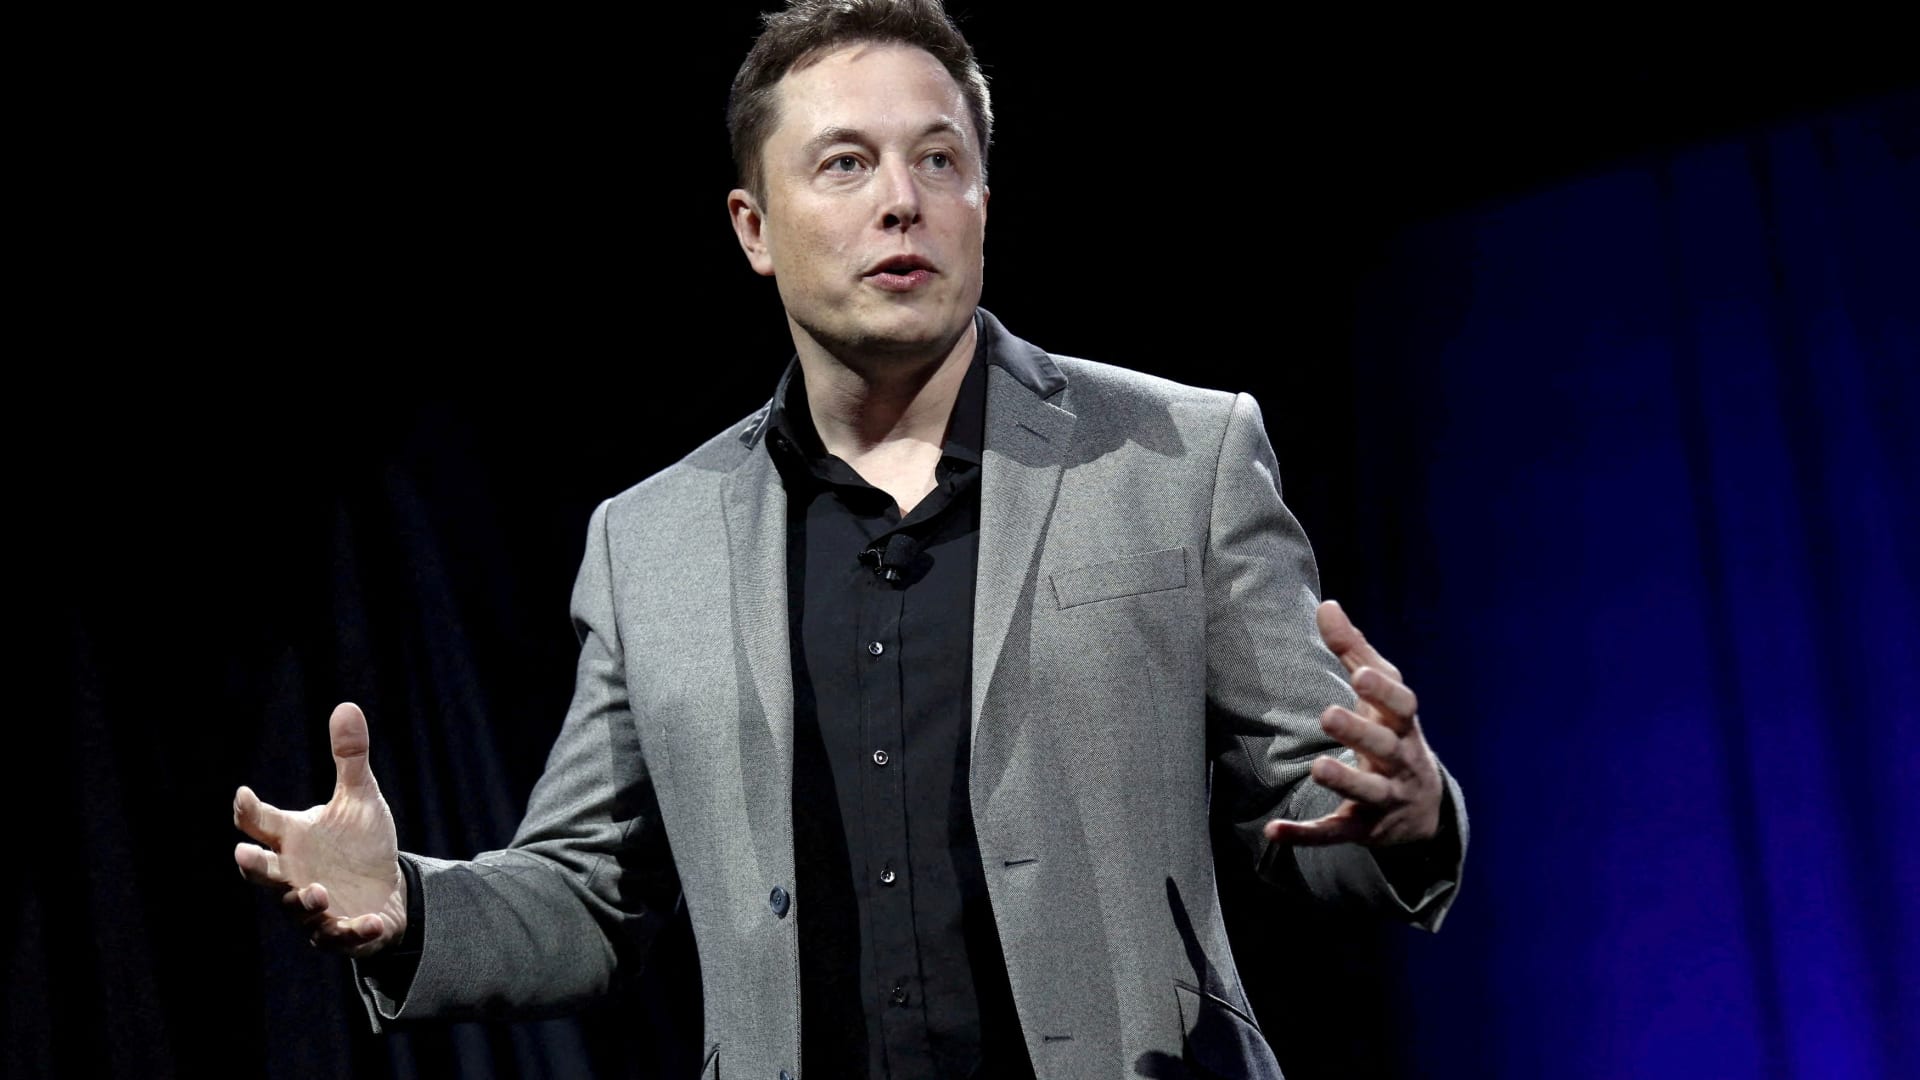 Musk says Tesla’s factories in Berlin and Texas are ‘gigantic money furnaces’